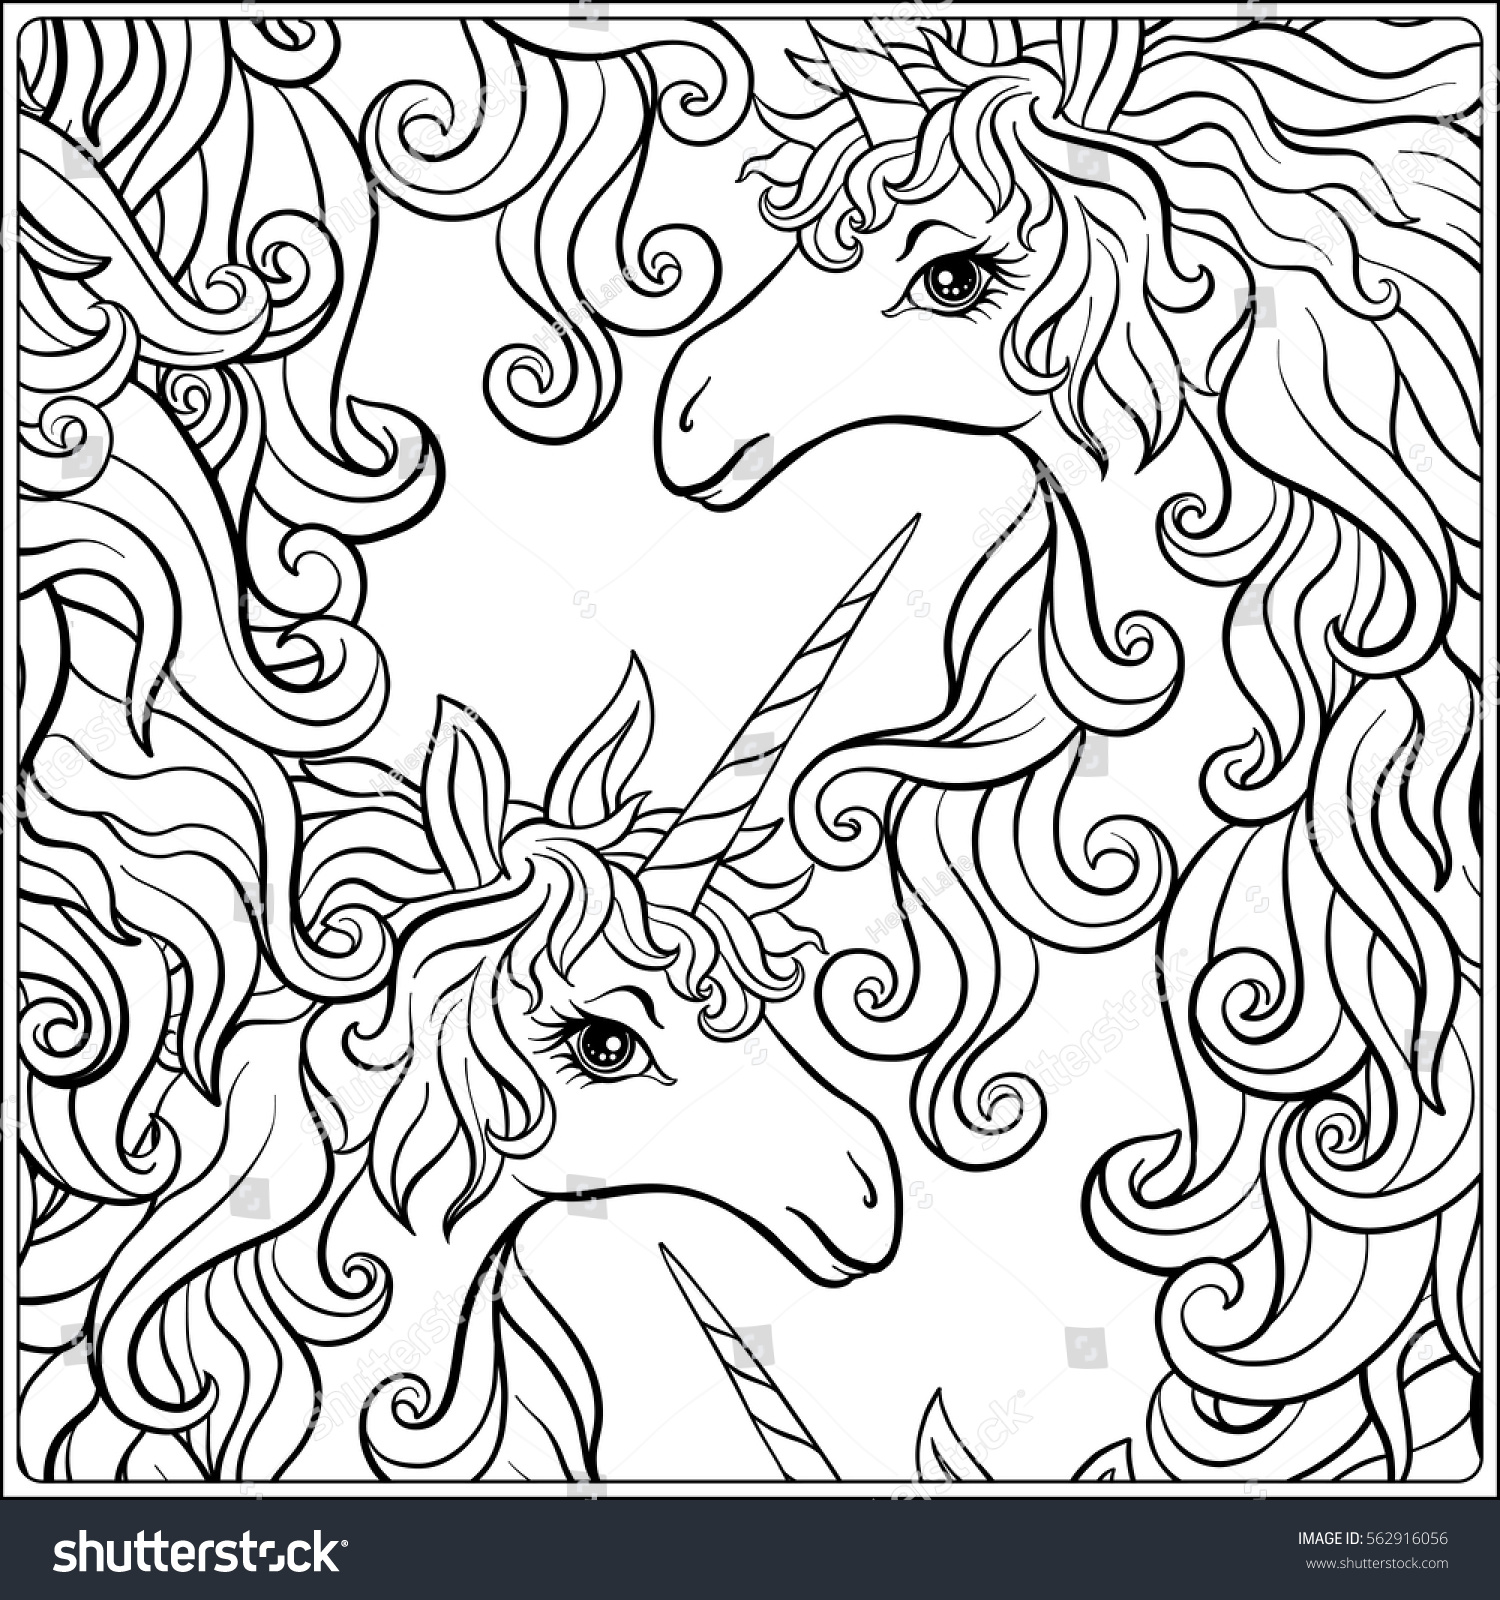 Outline Seamless Pattern Unicorn Outline Drawing Stock Vector 562916056 - Shutterstock